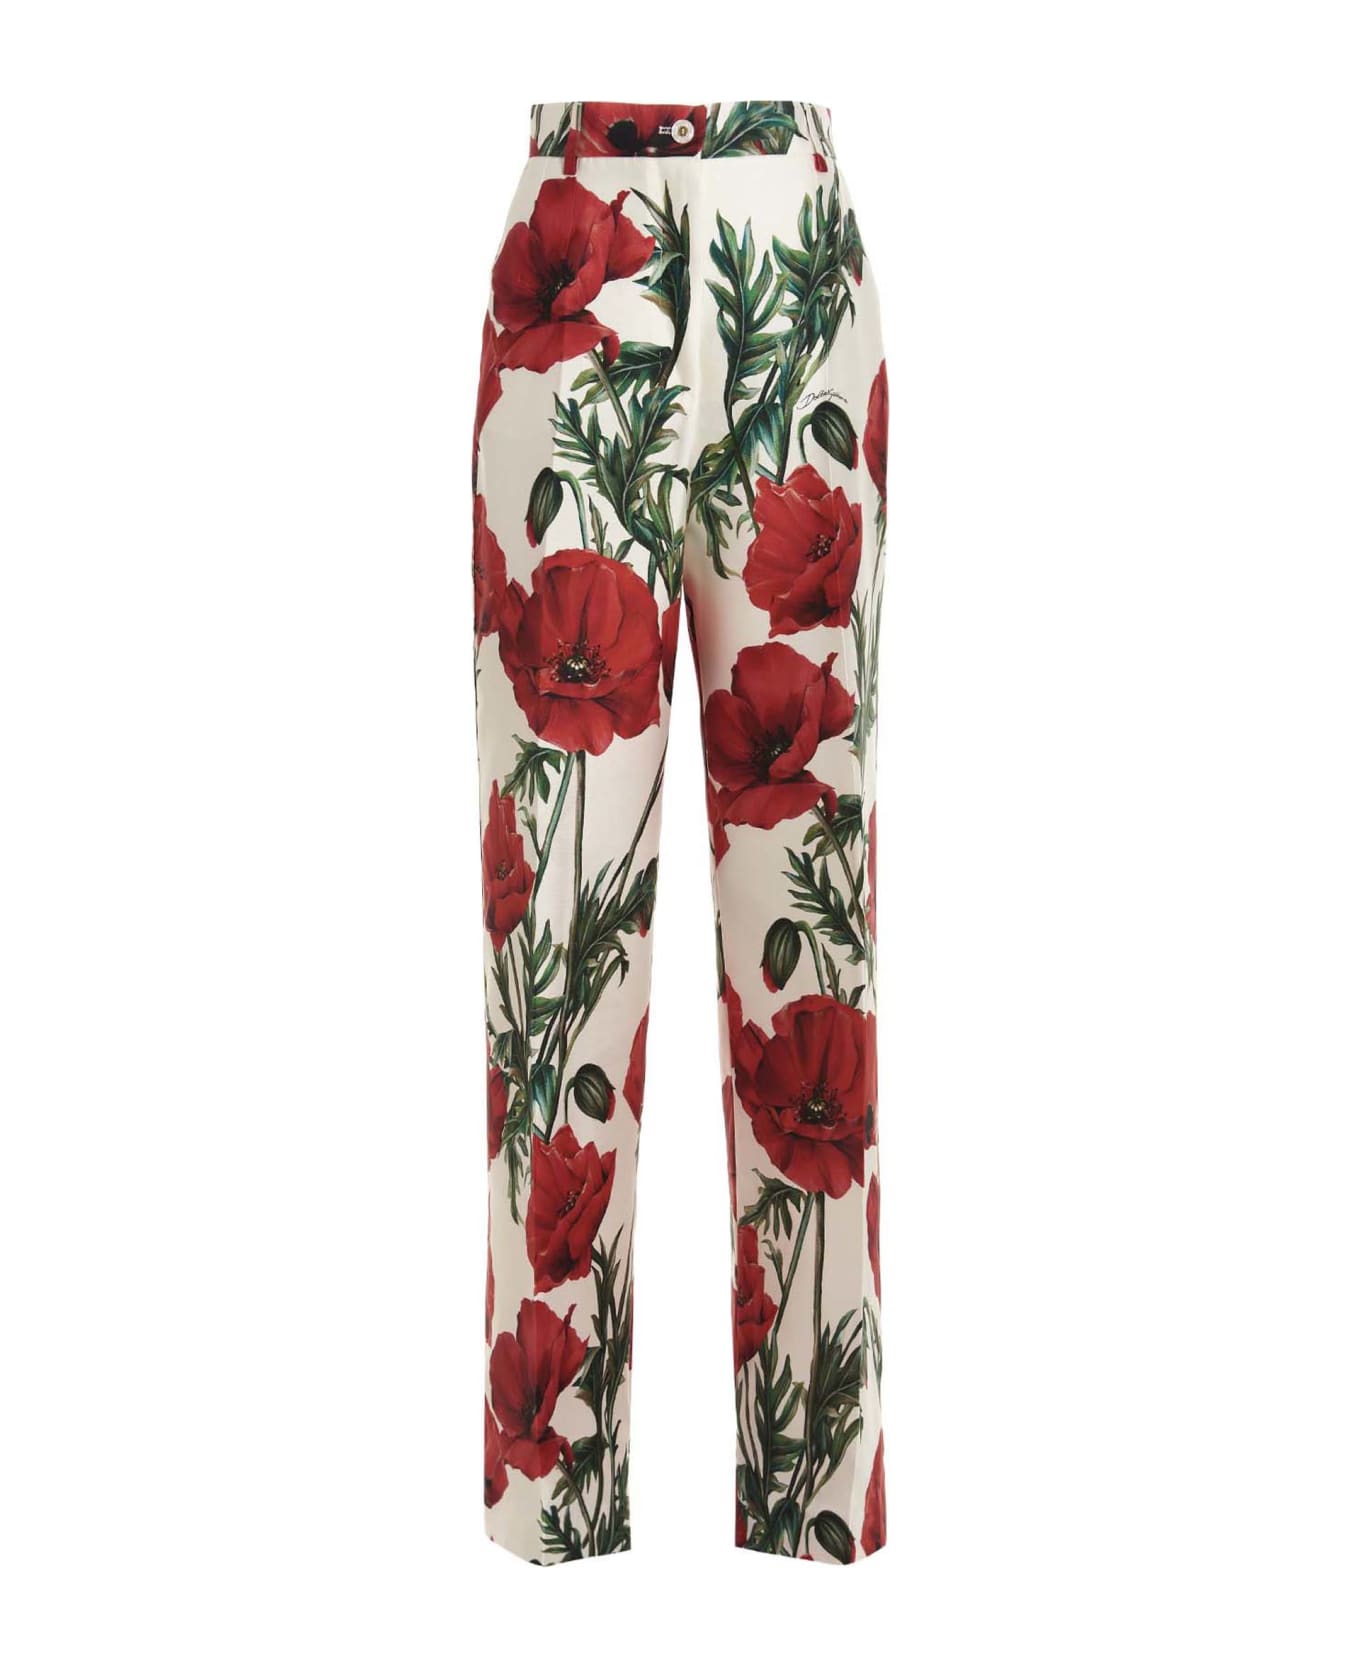 Dolce & Gabbana Floral Print Pants - Multicolor ボトムス